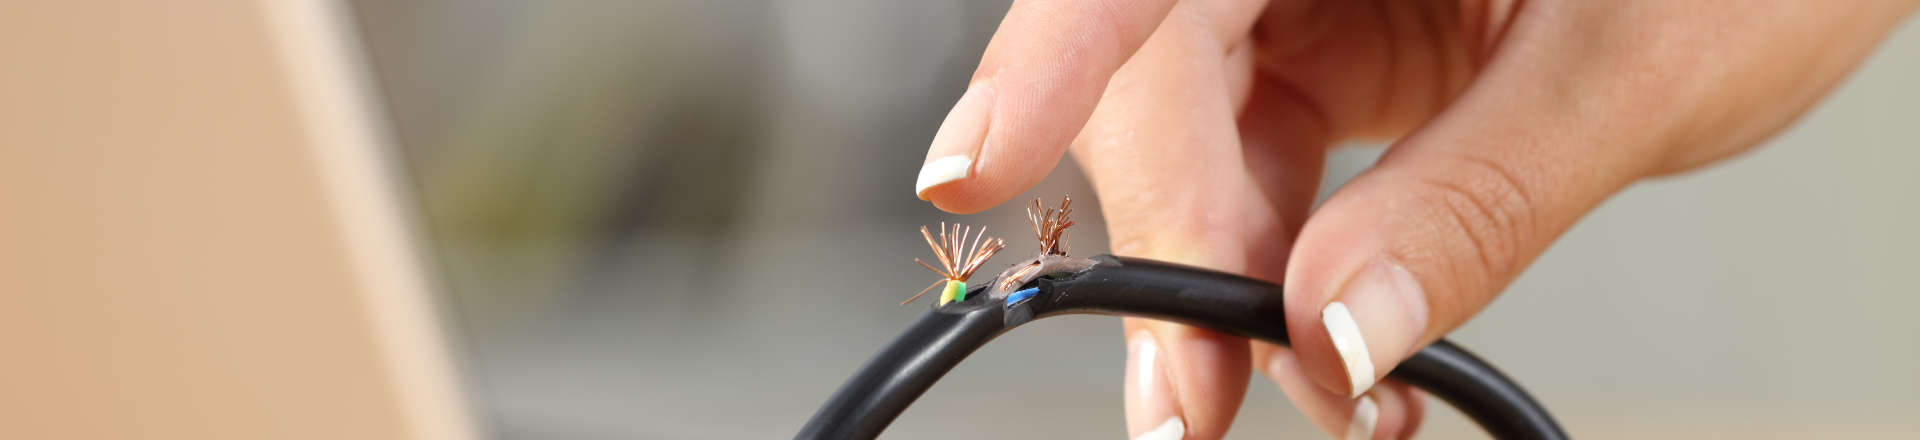 a person holding a damaged cable